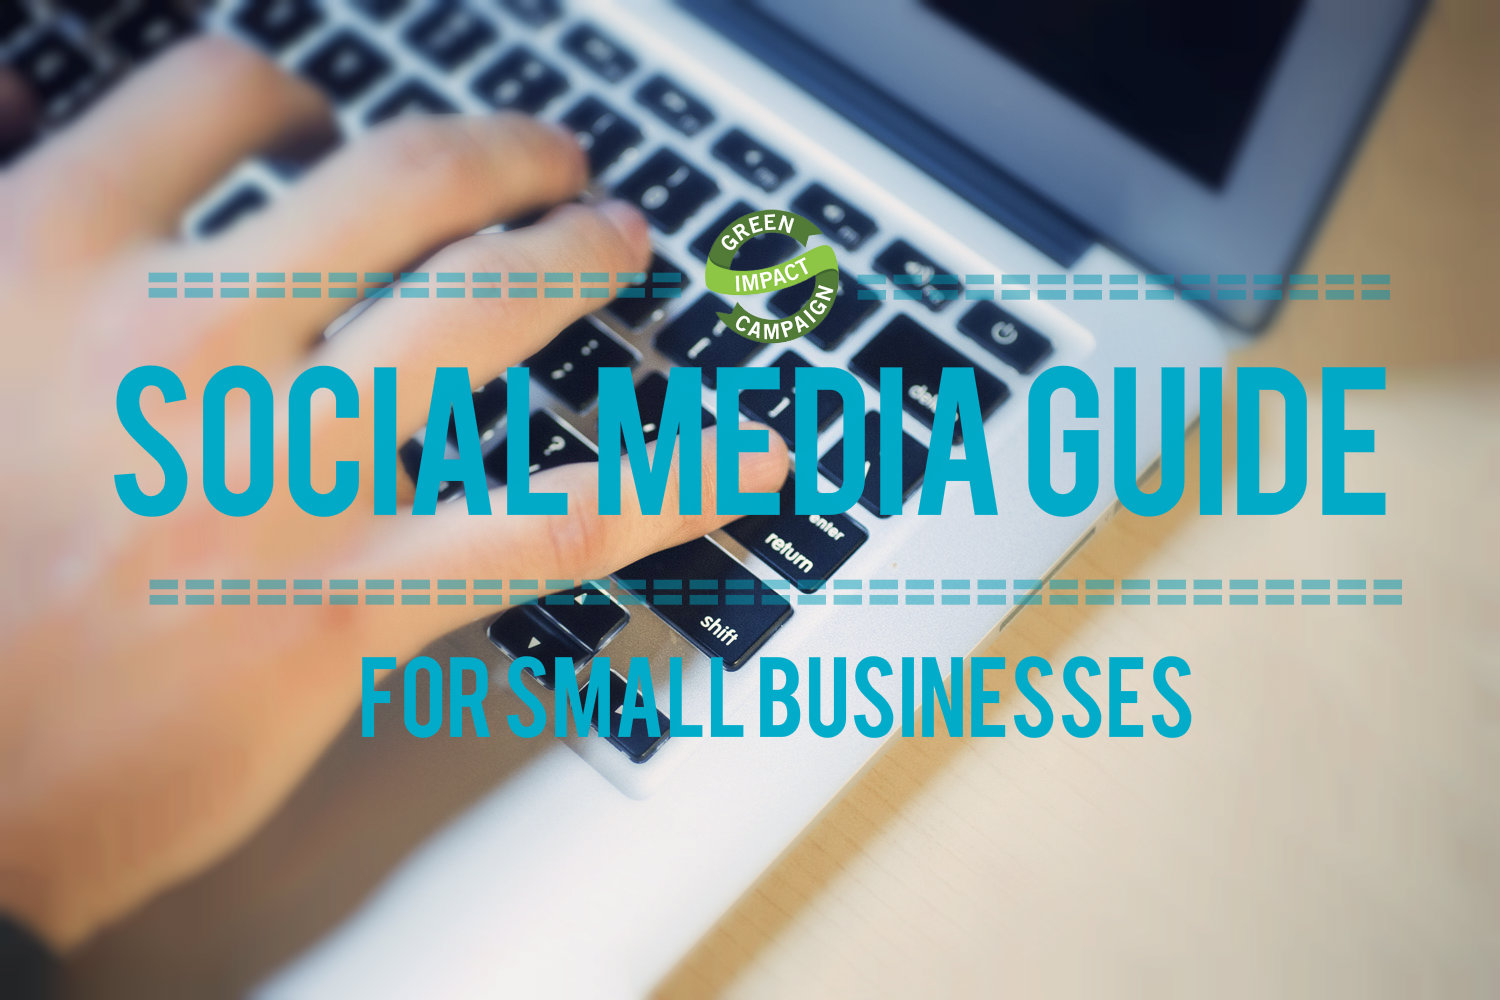 Social Media Guide for Participating GIC Businesses